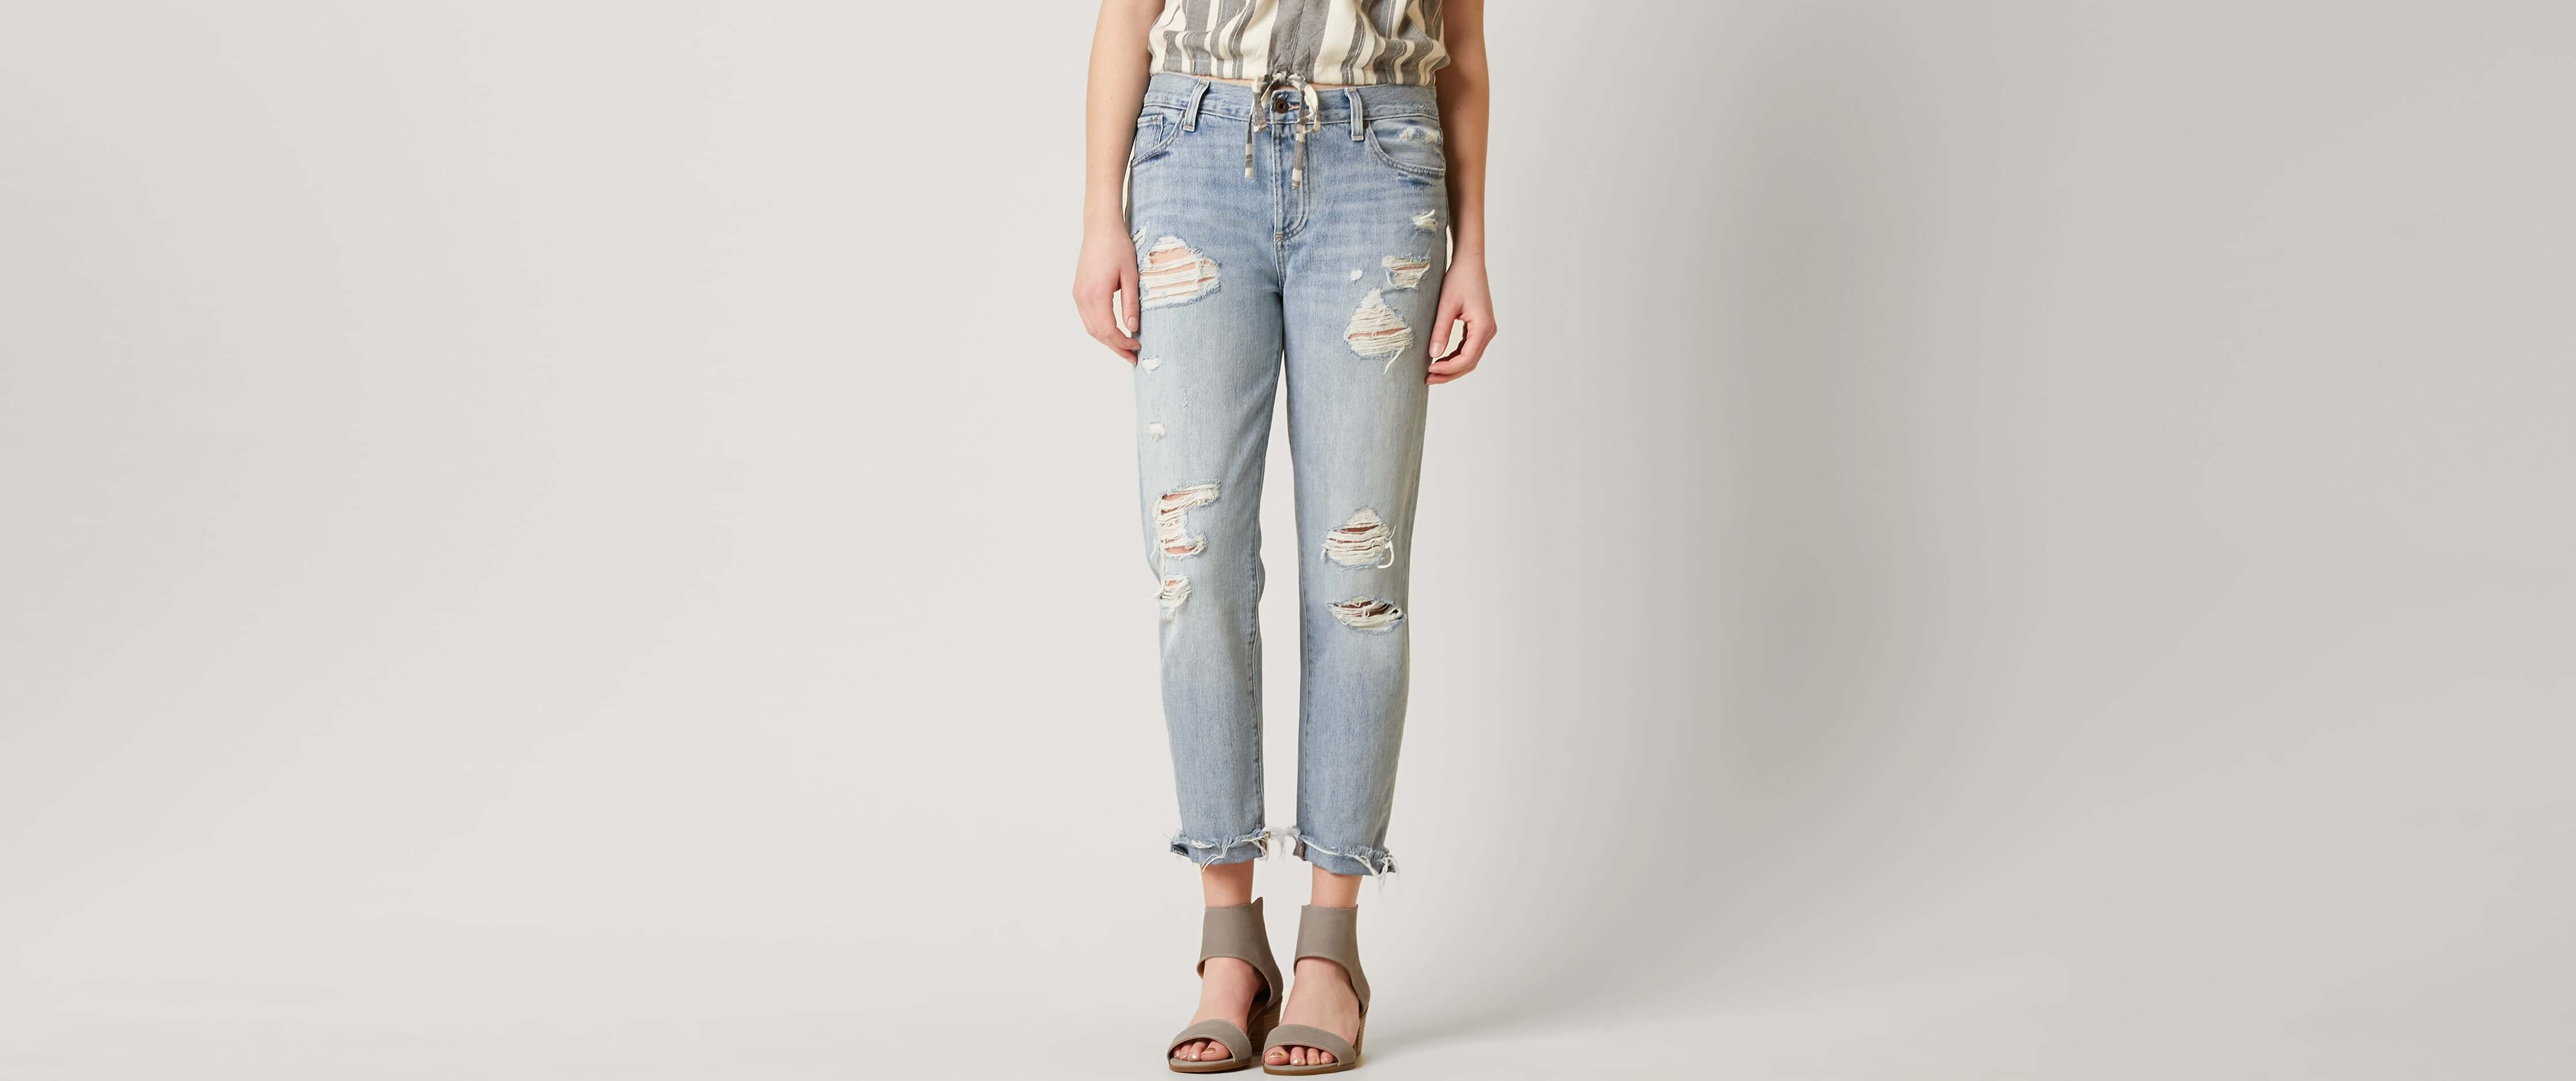 lucky brand jeans sold near me